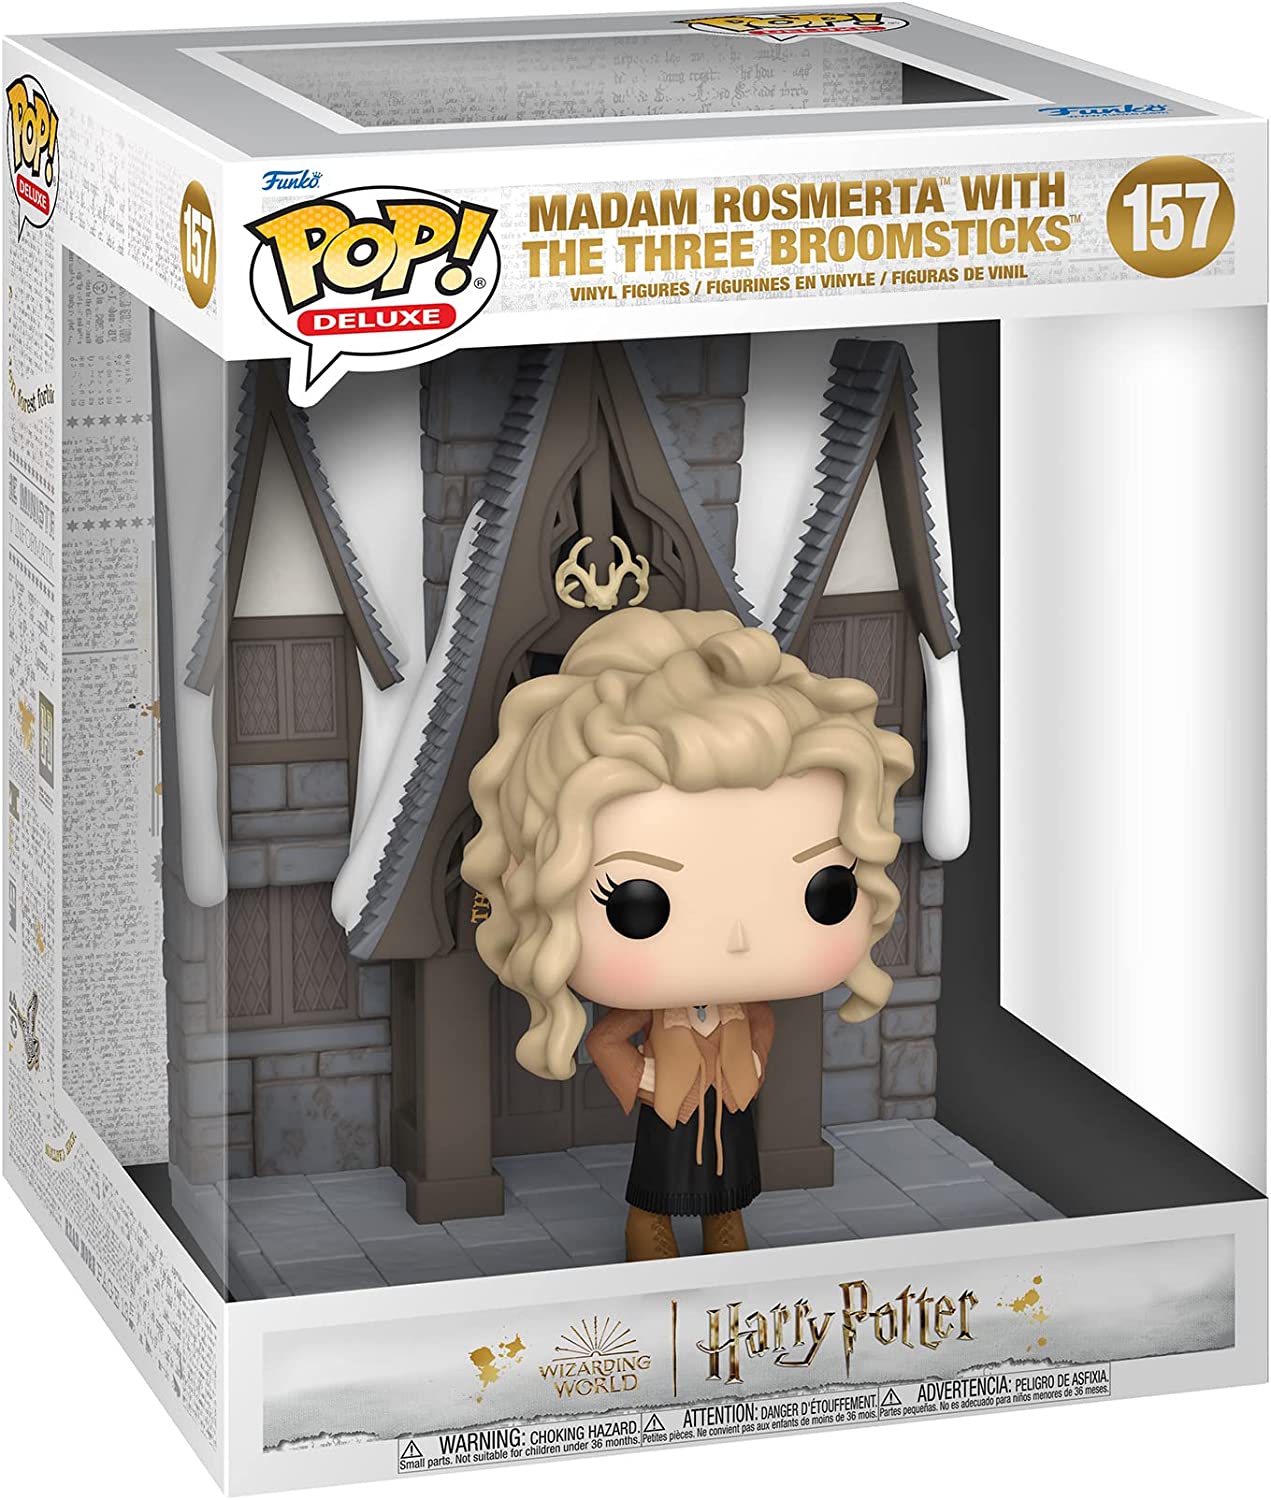 Funko POP! Deluxe: Harry Potter - Madam Rosmerta with The Three Broomsticks